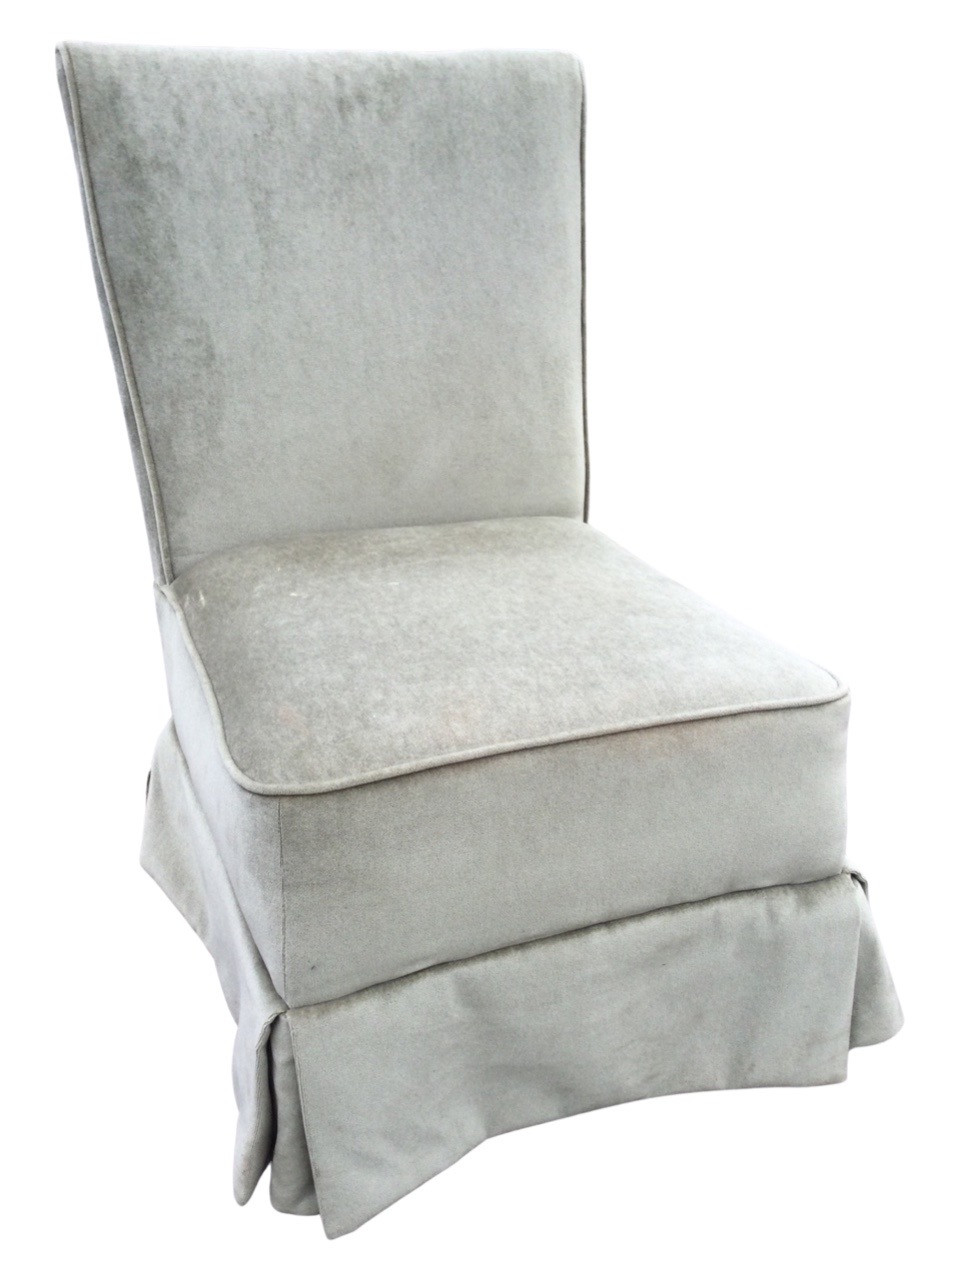 A pale green velour upholstered bedroom chair with wide tapering padded back above a sprung